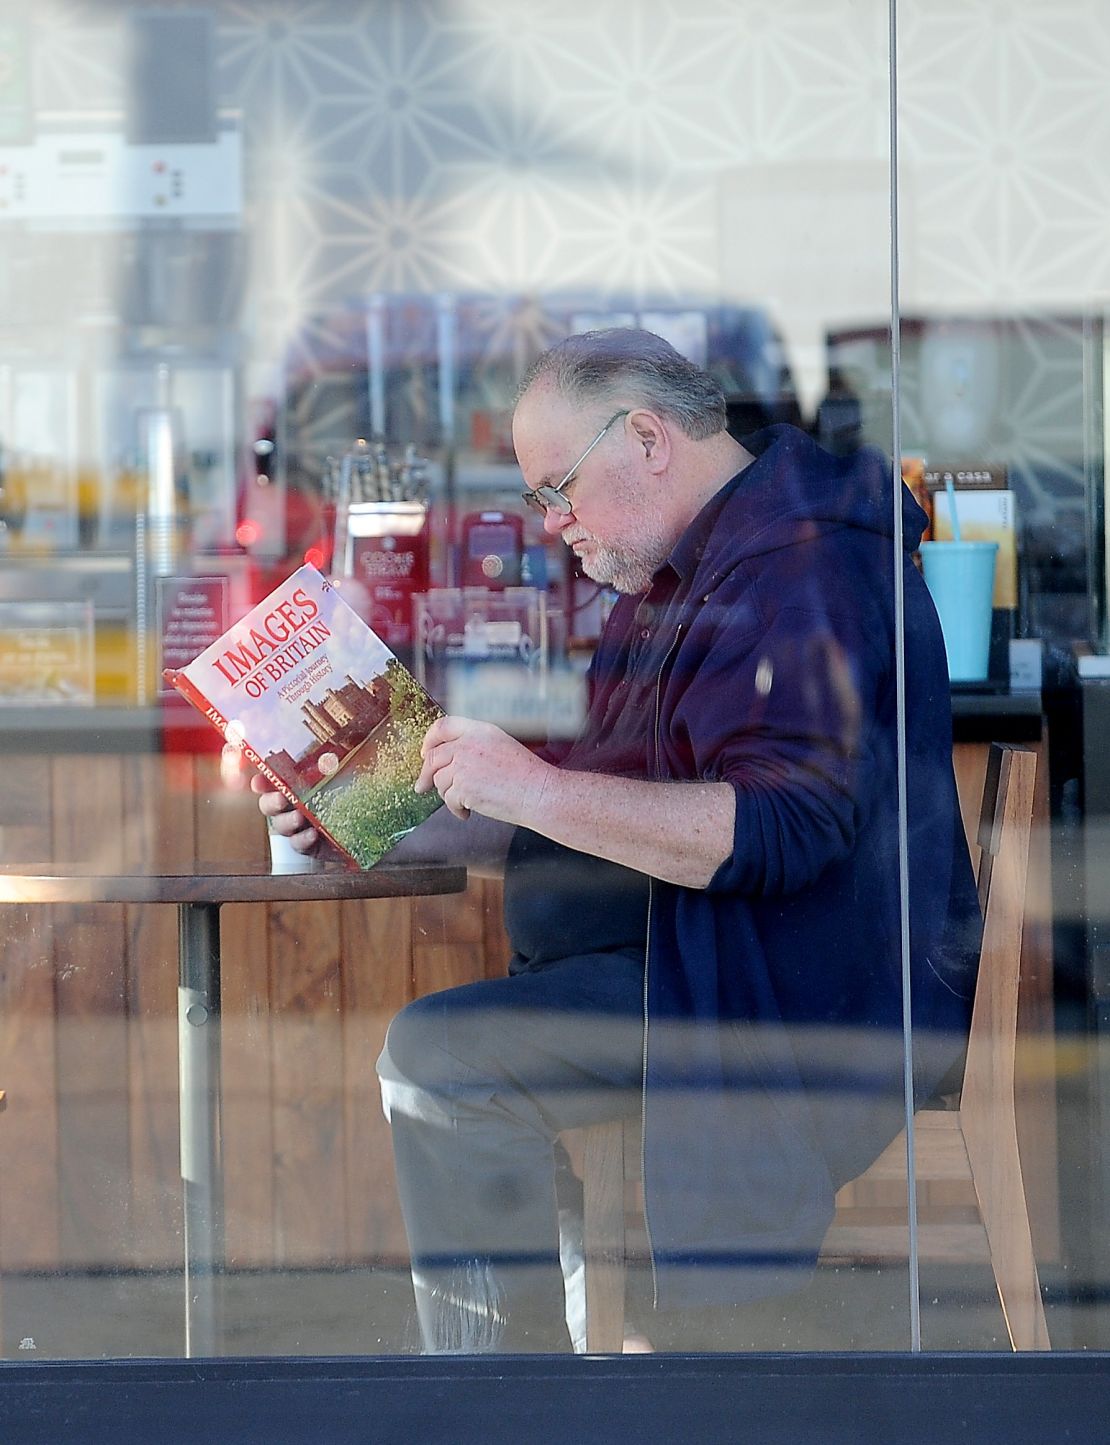 Thomas Markle reading a book titled "Images of Britain," in an allegedly staged photo.  